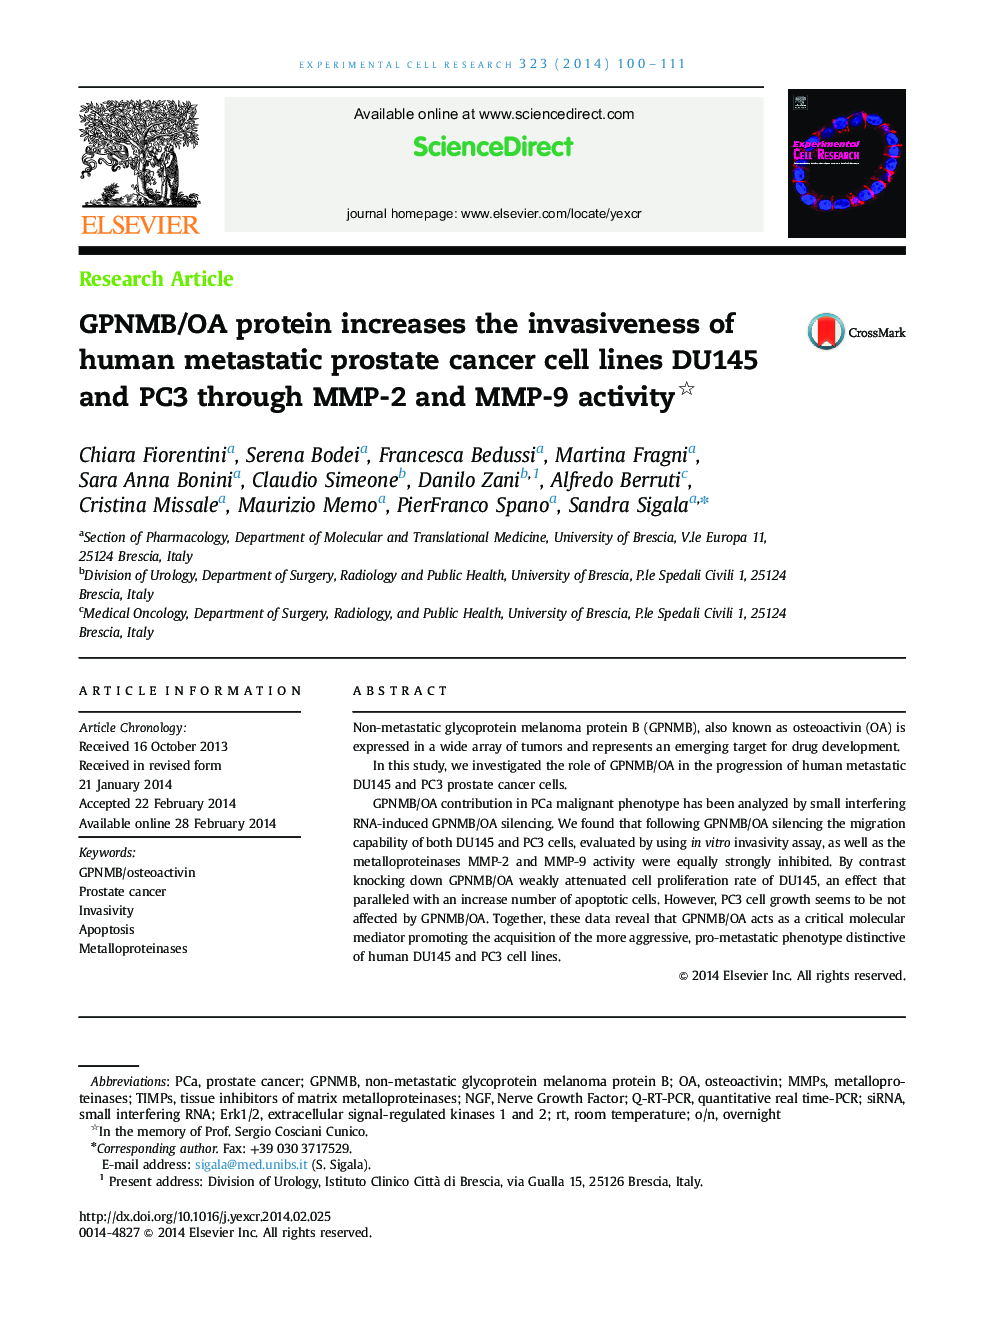 GPNMB/OA protein increases the invasiveness of human metastatic prostate cancer cell lines DU145 and PC3 through MMP-2 and MMP-9 activity